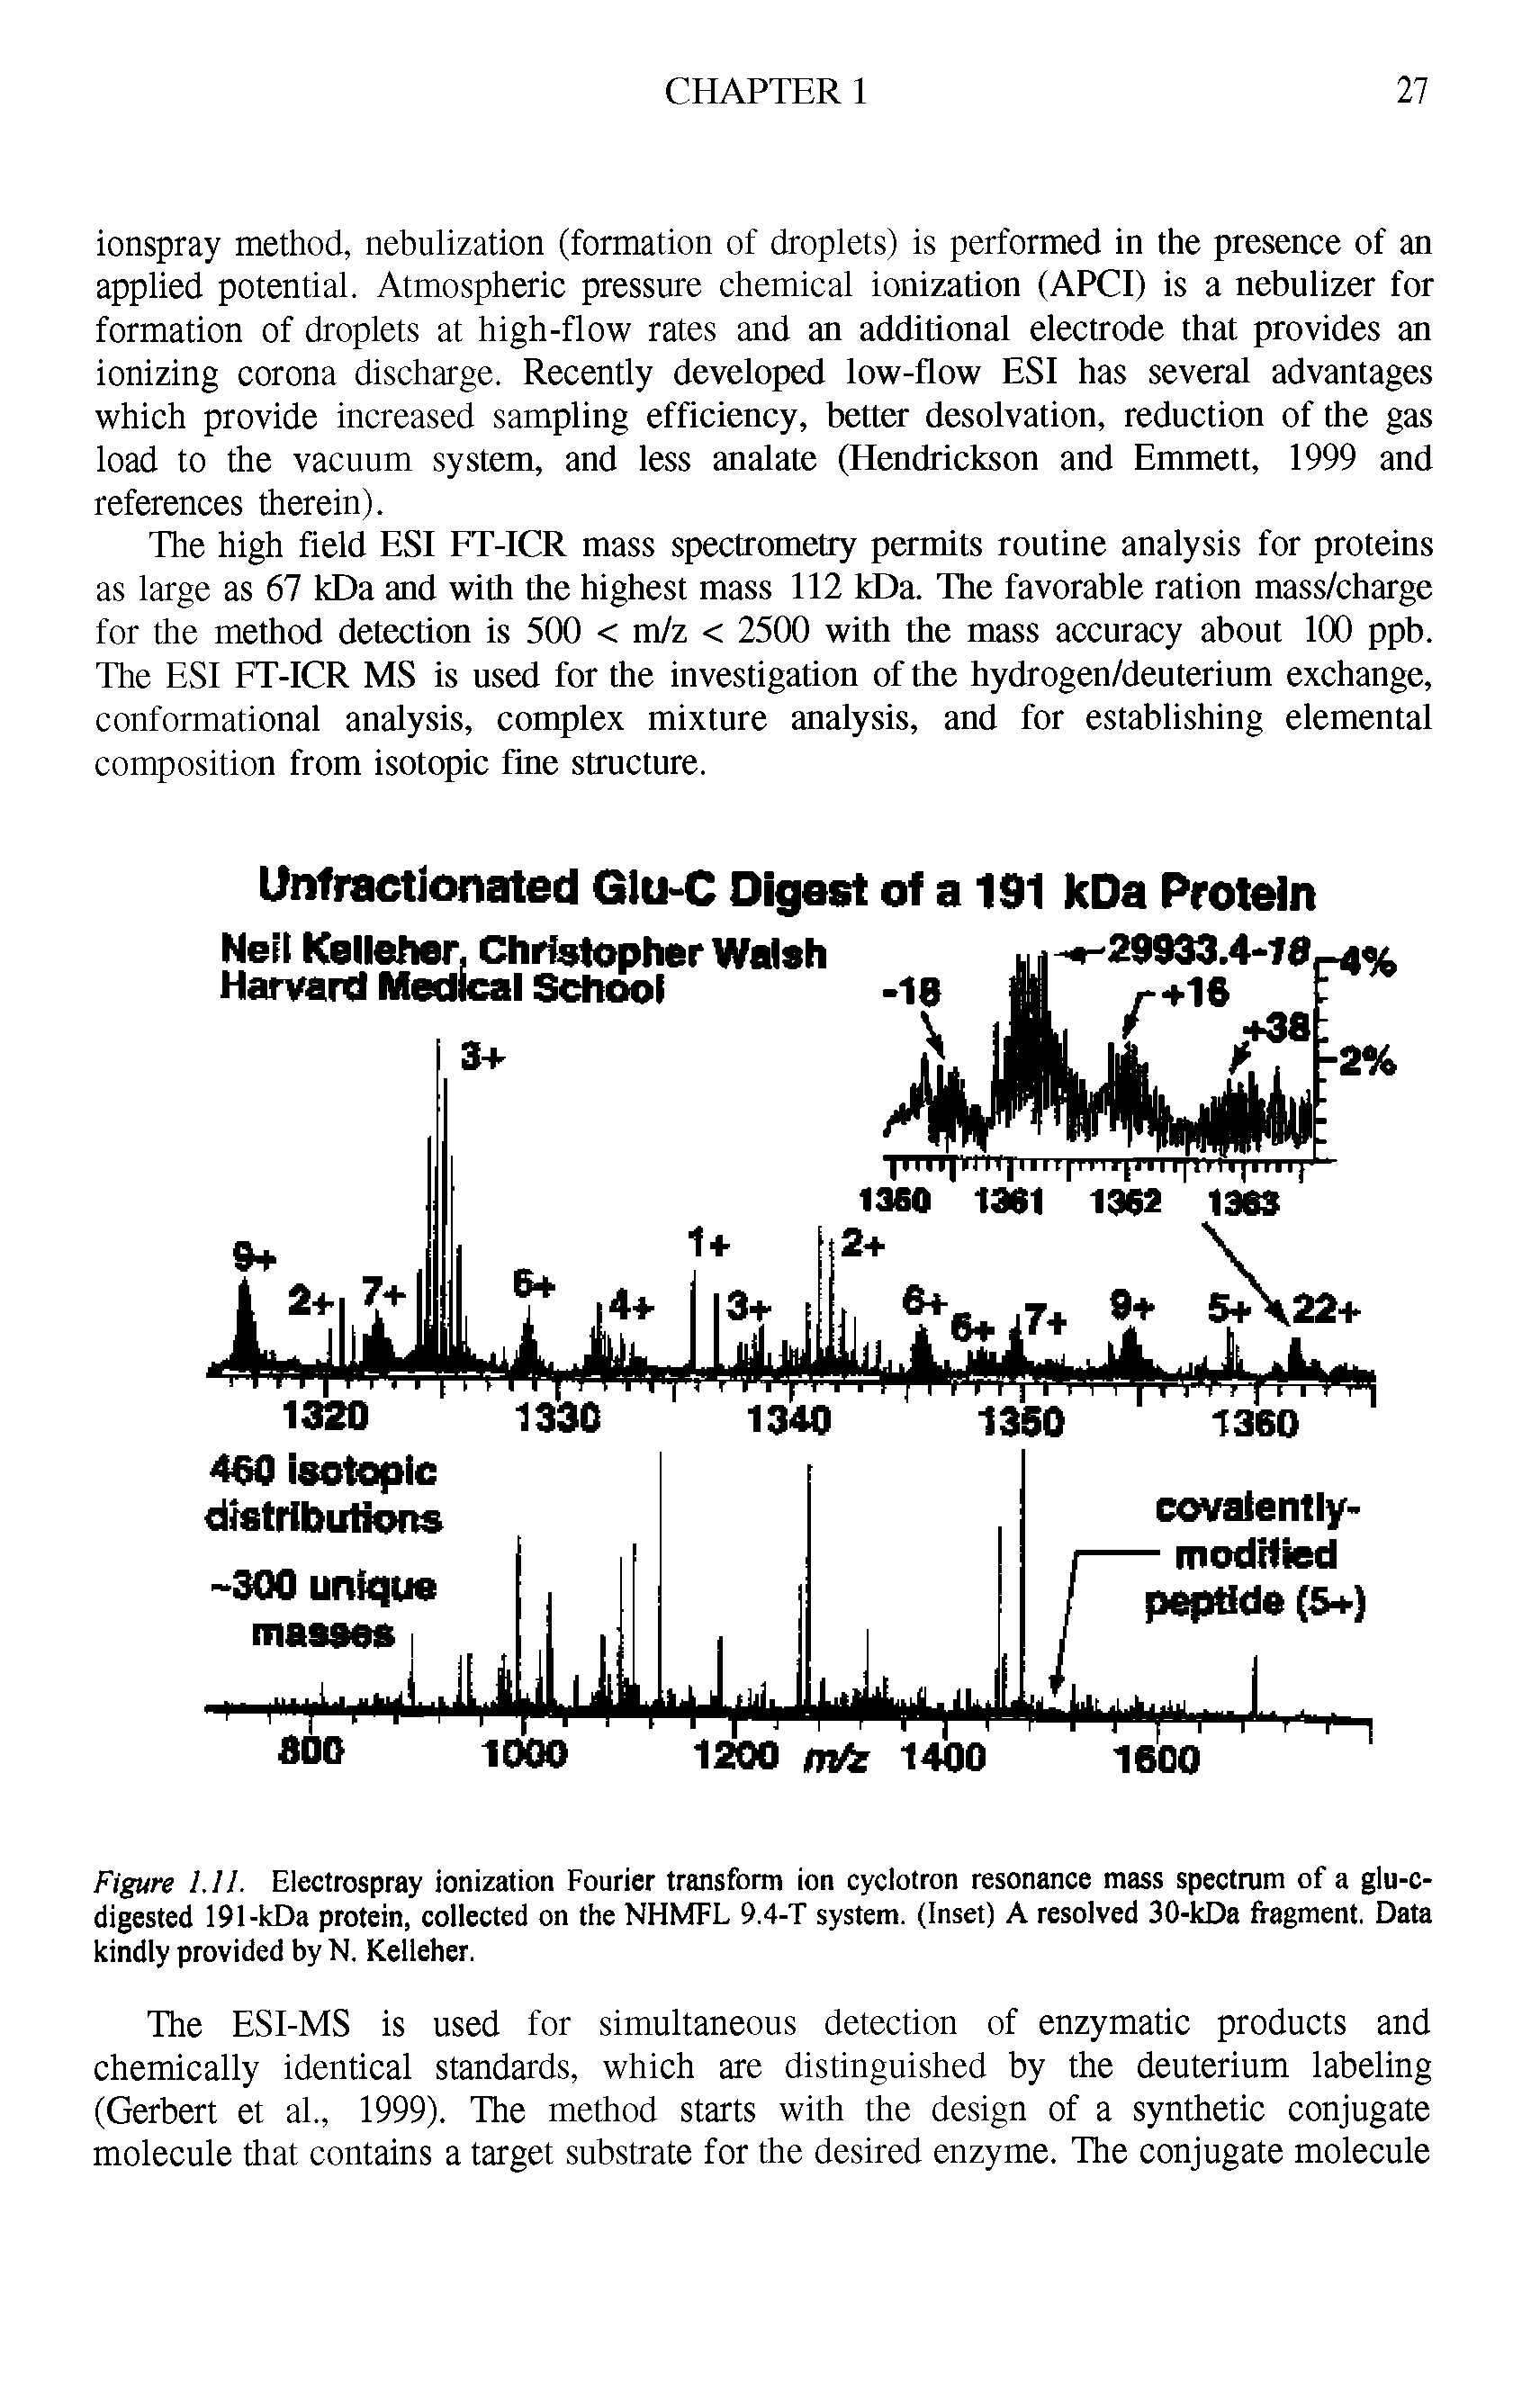 Figure 1.11. Electrospray ionization Fourier transform ion cyclotron resonance mass spectrum of a glu-c-digested 191-kDa protein, collected on the NHMFL 9.4-T system. (Inset) A resolved 30-kDa fragment. Data kindly provided by N. Kelleher.